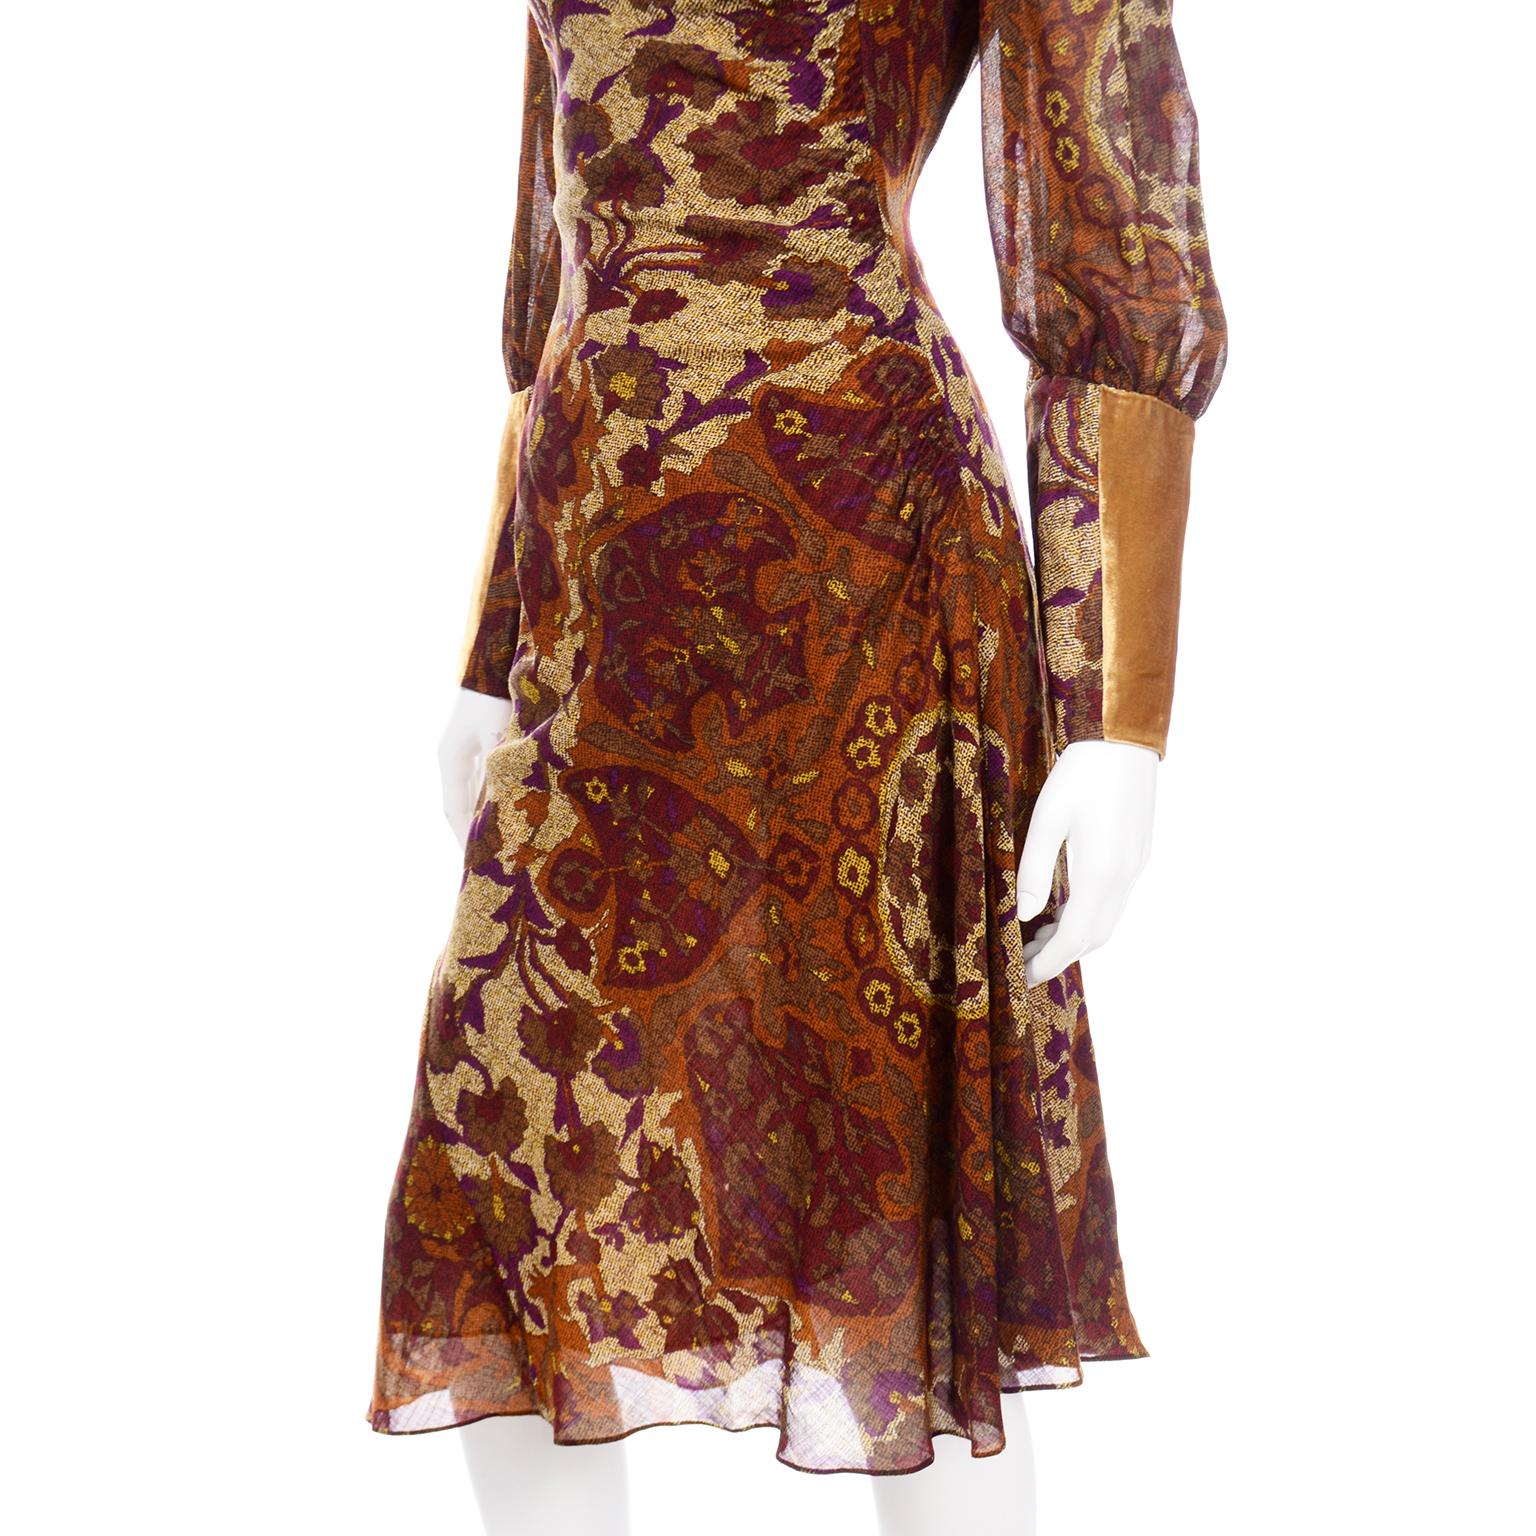 Kenzo Vintage Lush Plum Brown and Gold Floral Print Dress w Gold Velvet Trim For Sale 4